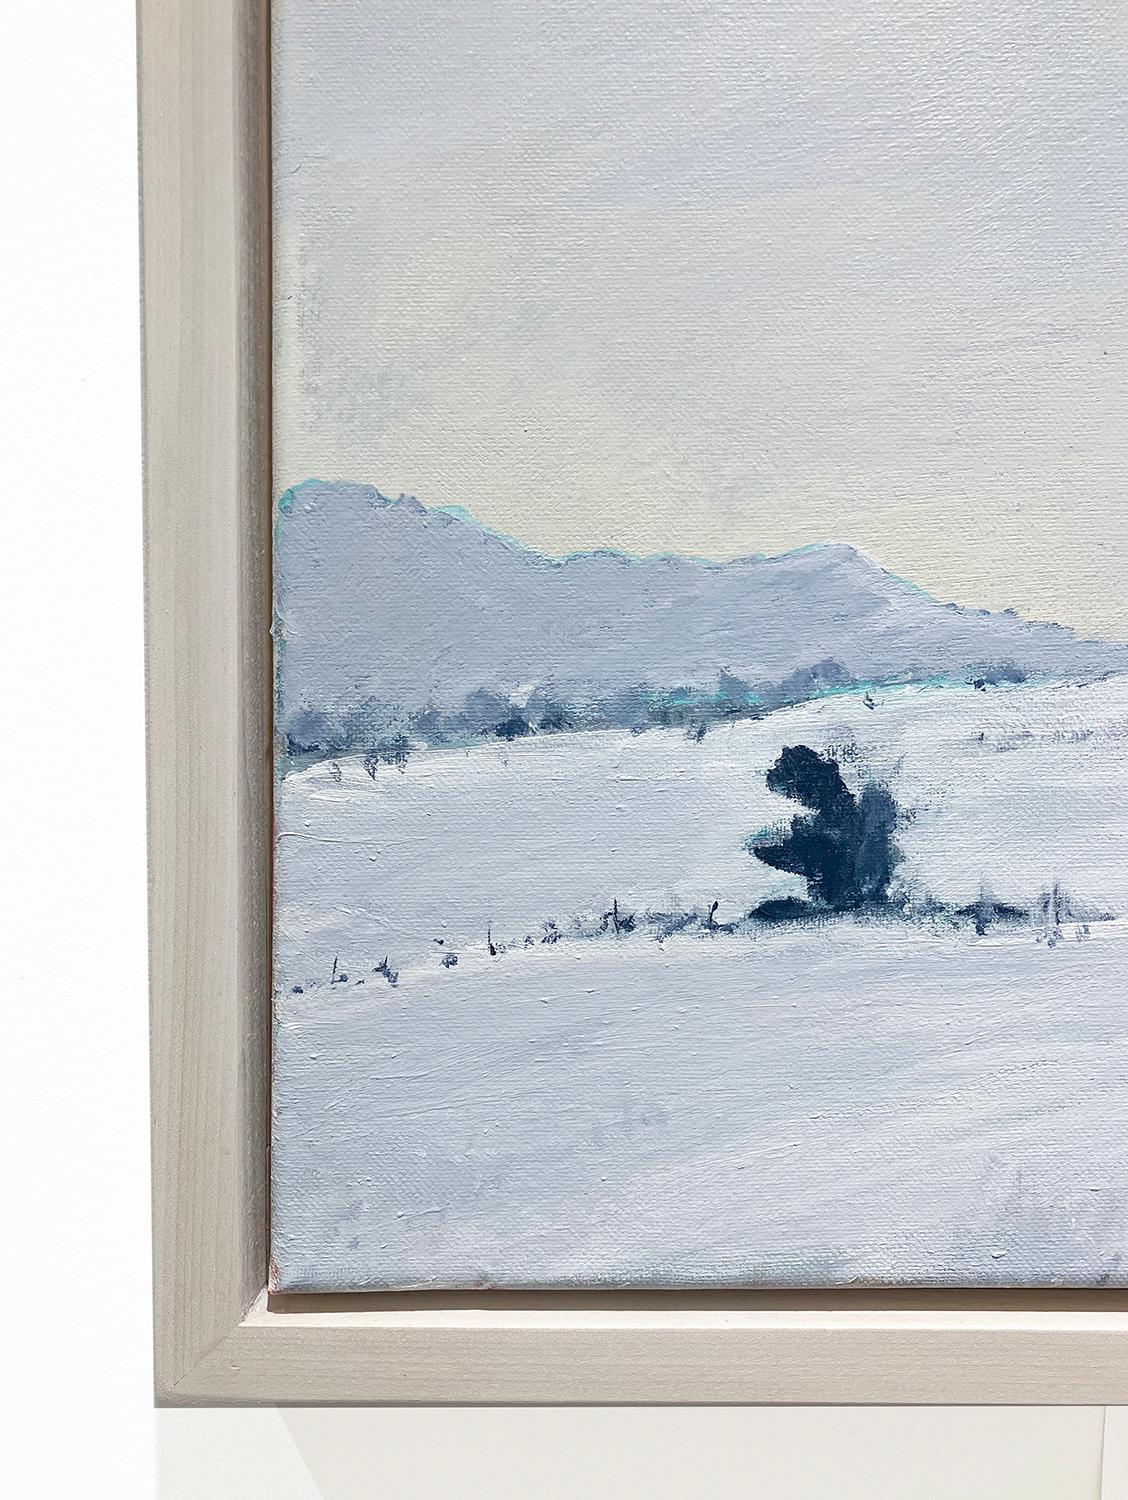 Modern en plein air winter landscape oil painting on canvas of a white snow-blanketed countryside 
'Midsummer' by Joseph Rapp
16 x 20 inches, acrylic on canvas
17.75 x 21.75 inches framed in white stained wood floater frame

Joseph Rapp’s